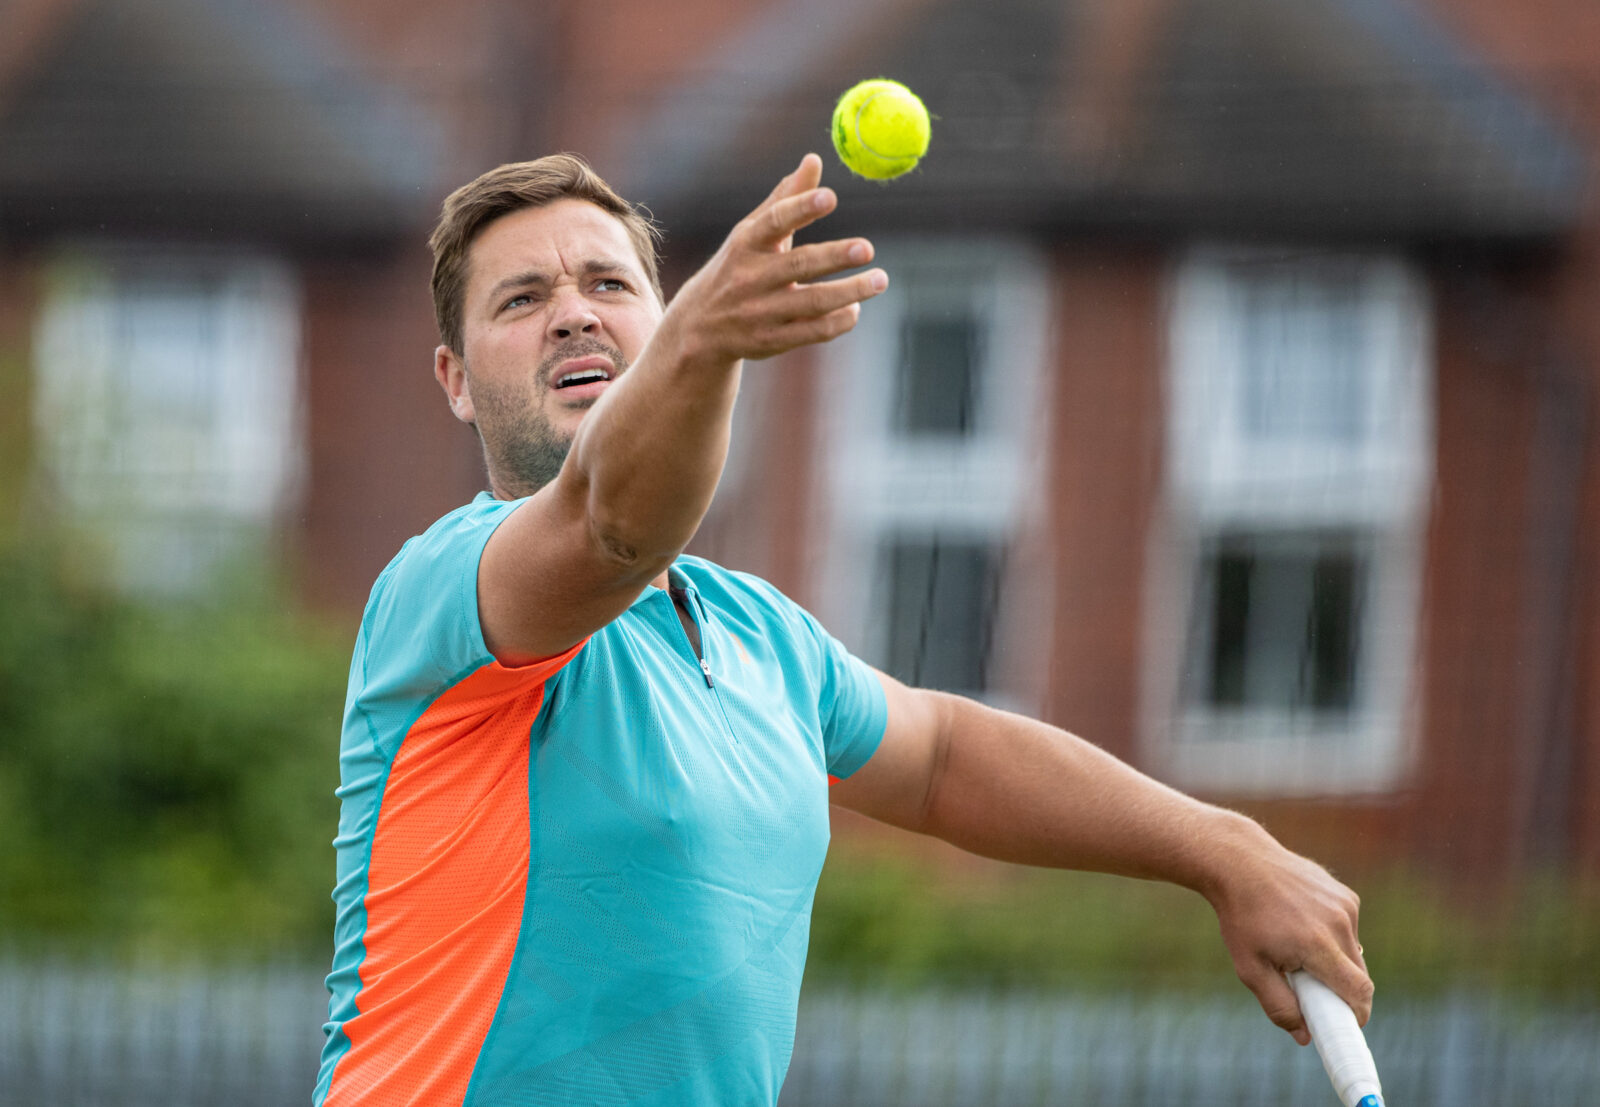 LIVERPOOL, ENGLAND - Thursday, August 19, 2021: Marcus Willis (GBR) during the Liverpool International Tennis Tournament at Liverpool Cricket Club. (Pic by David Rawcliffe/Propaganda)